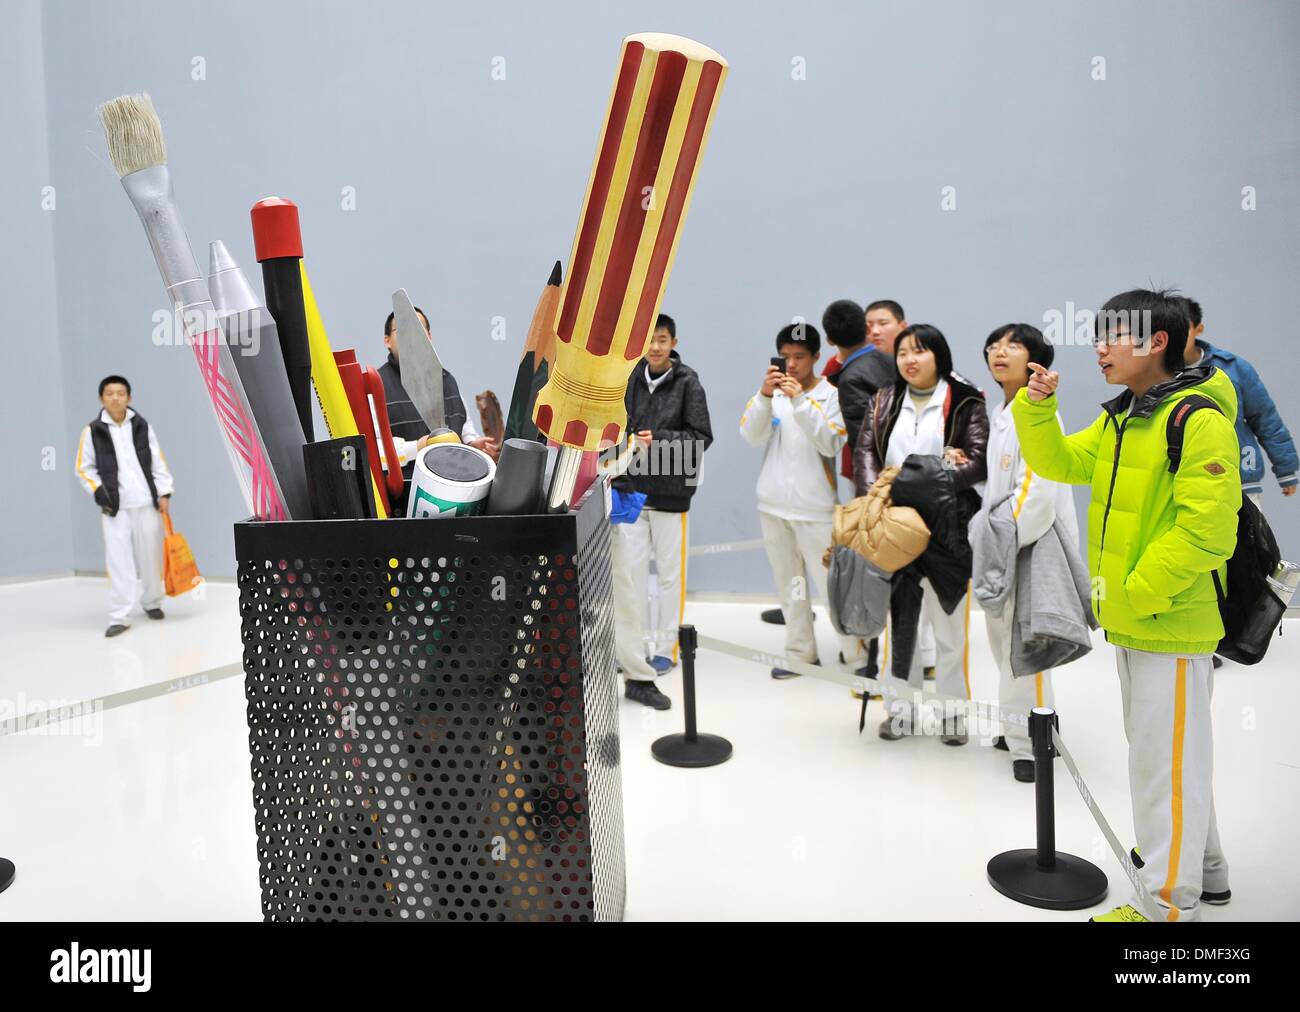 Jinan, China's Shandong Province. 14th Dec, 2013. Visitors view an art work displayed in an achievement exhibition of the nationwide art museum support program at the Shandong Art Museum in Jinan, capital of east China's Shandong Province, Dec. 14, 2013. Around 20 million RMB yuan (3.29 million U.S. dollars) has been spent in the support program since 2010, which benefits 53 art museums in 18 provinces. © Zhu Zheng/Xinhua/Alamy Live News Stock Photo